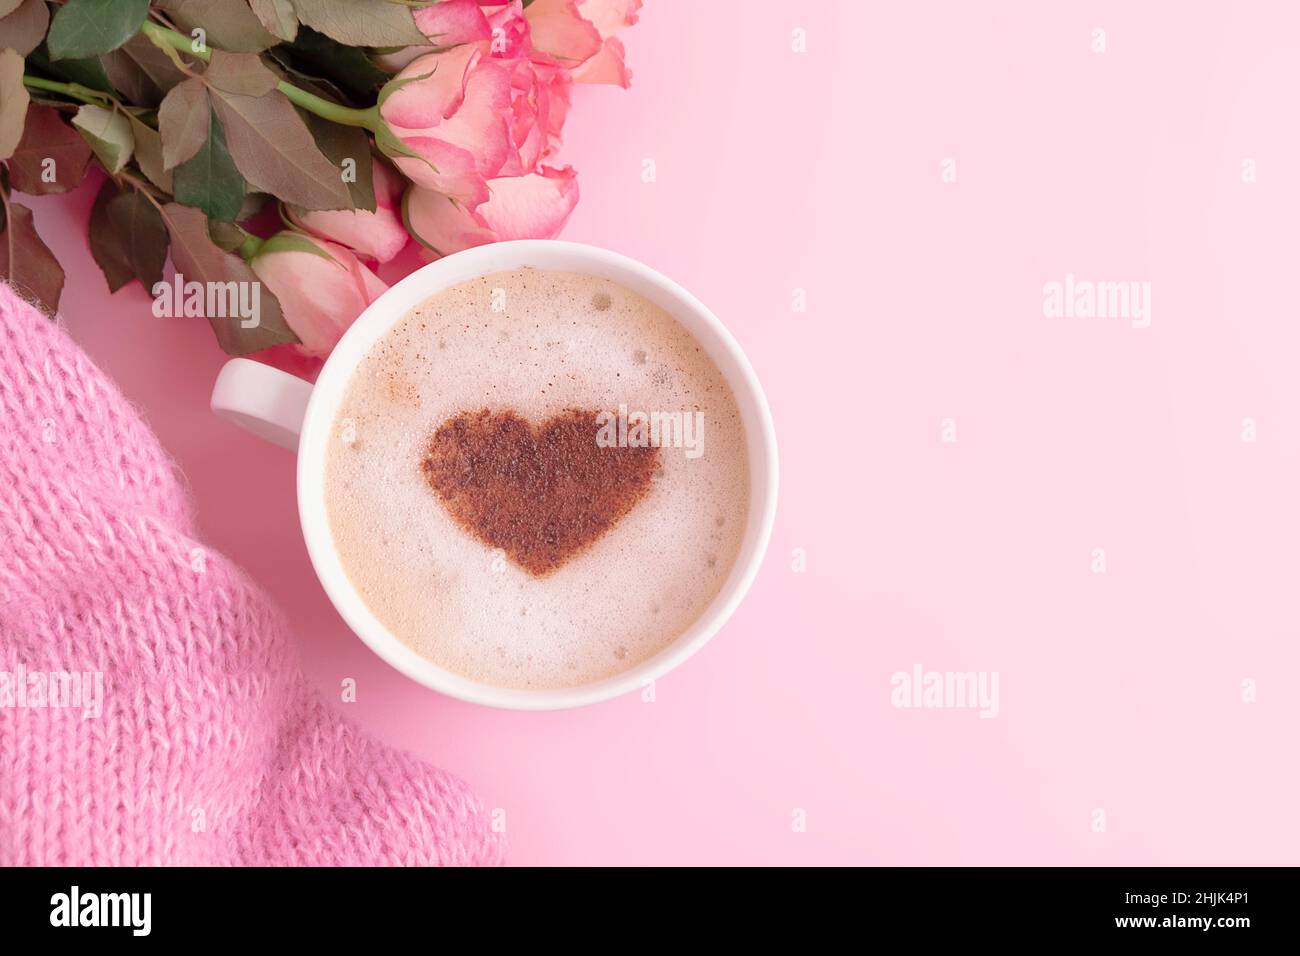 Romantic composition with coffee cup with heart on top, flowers and knitted blanket on pastel pink background and copy space Stock Photo